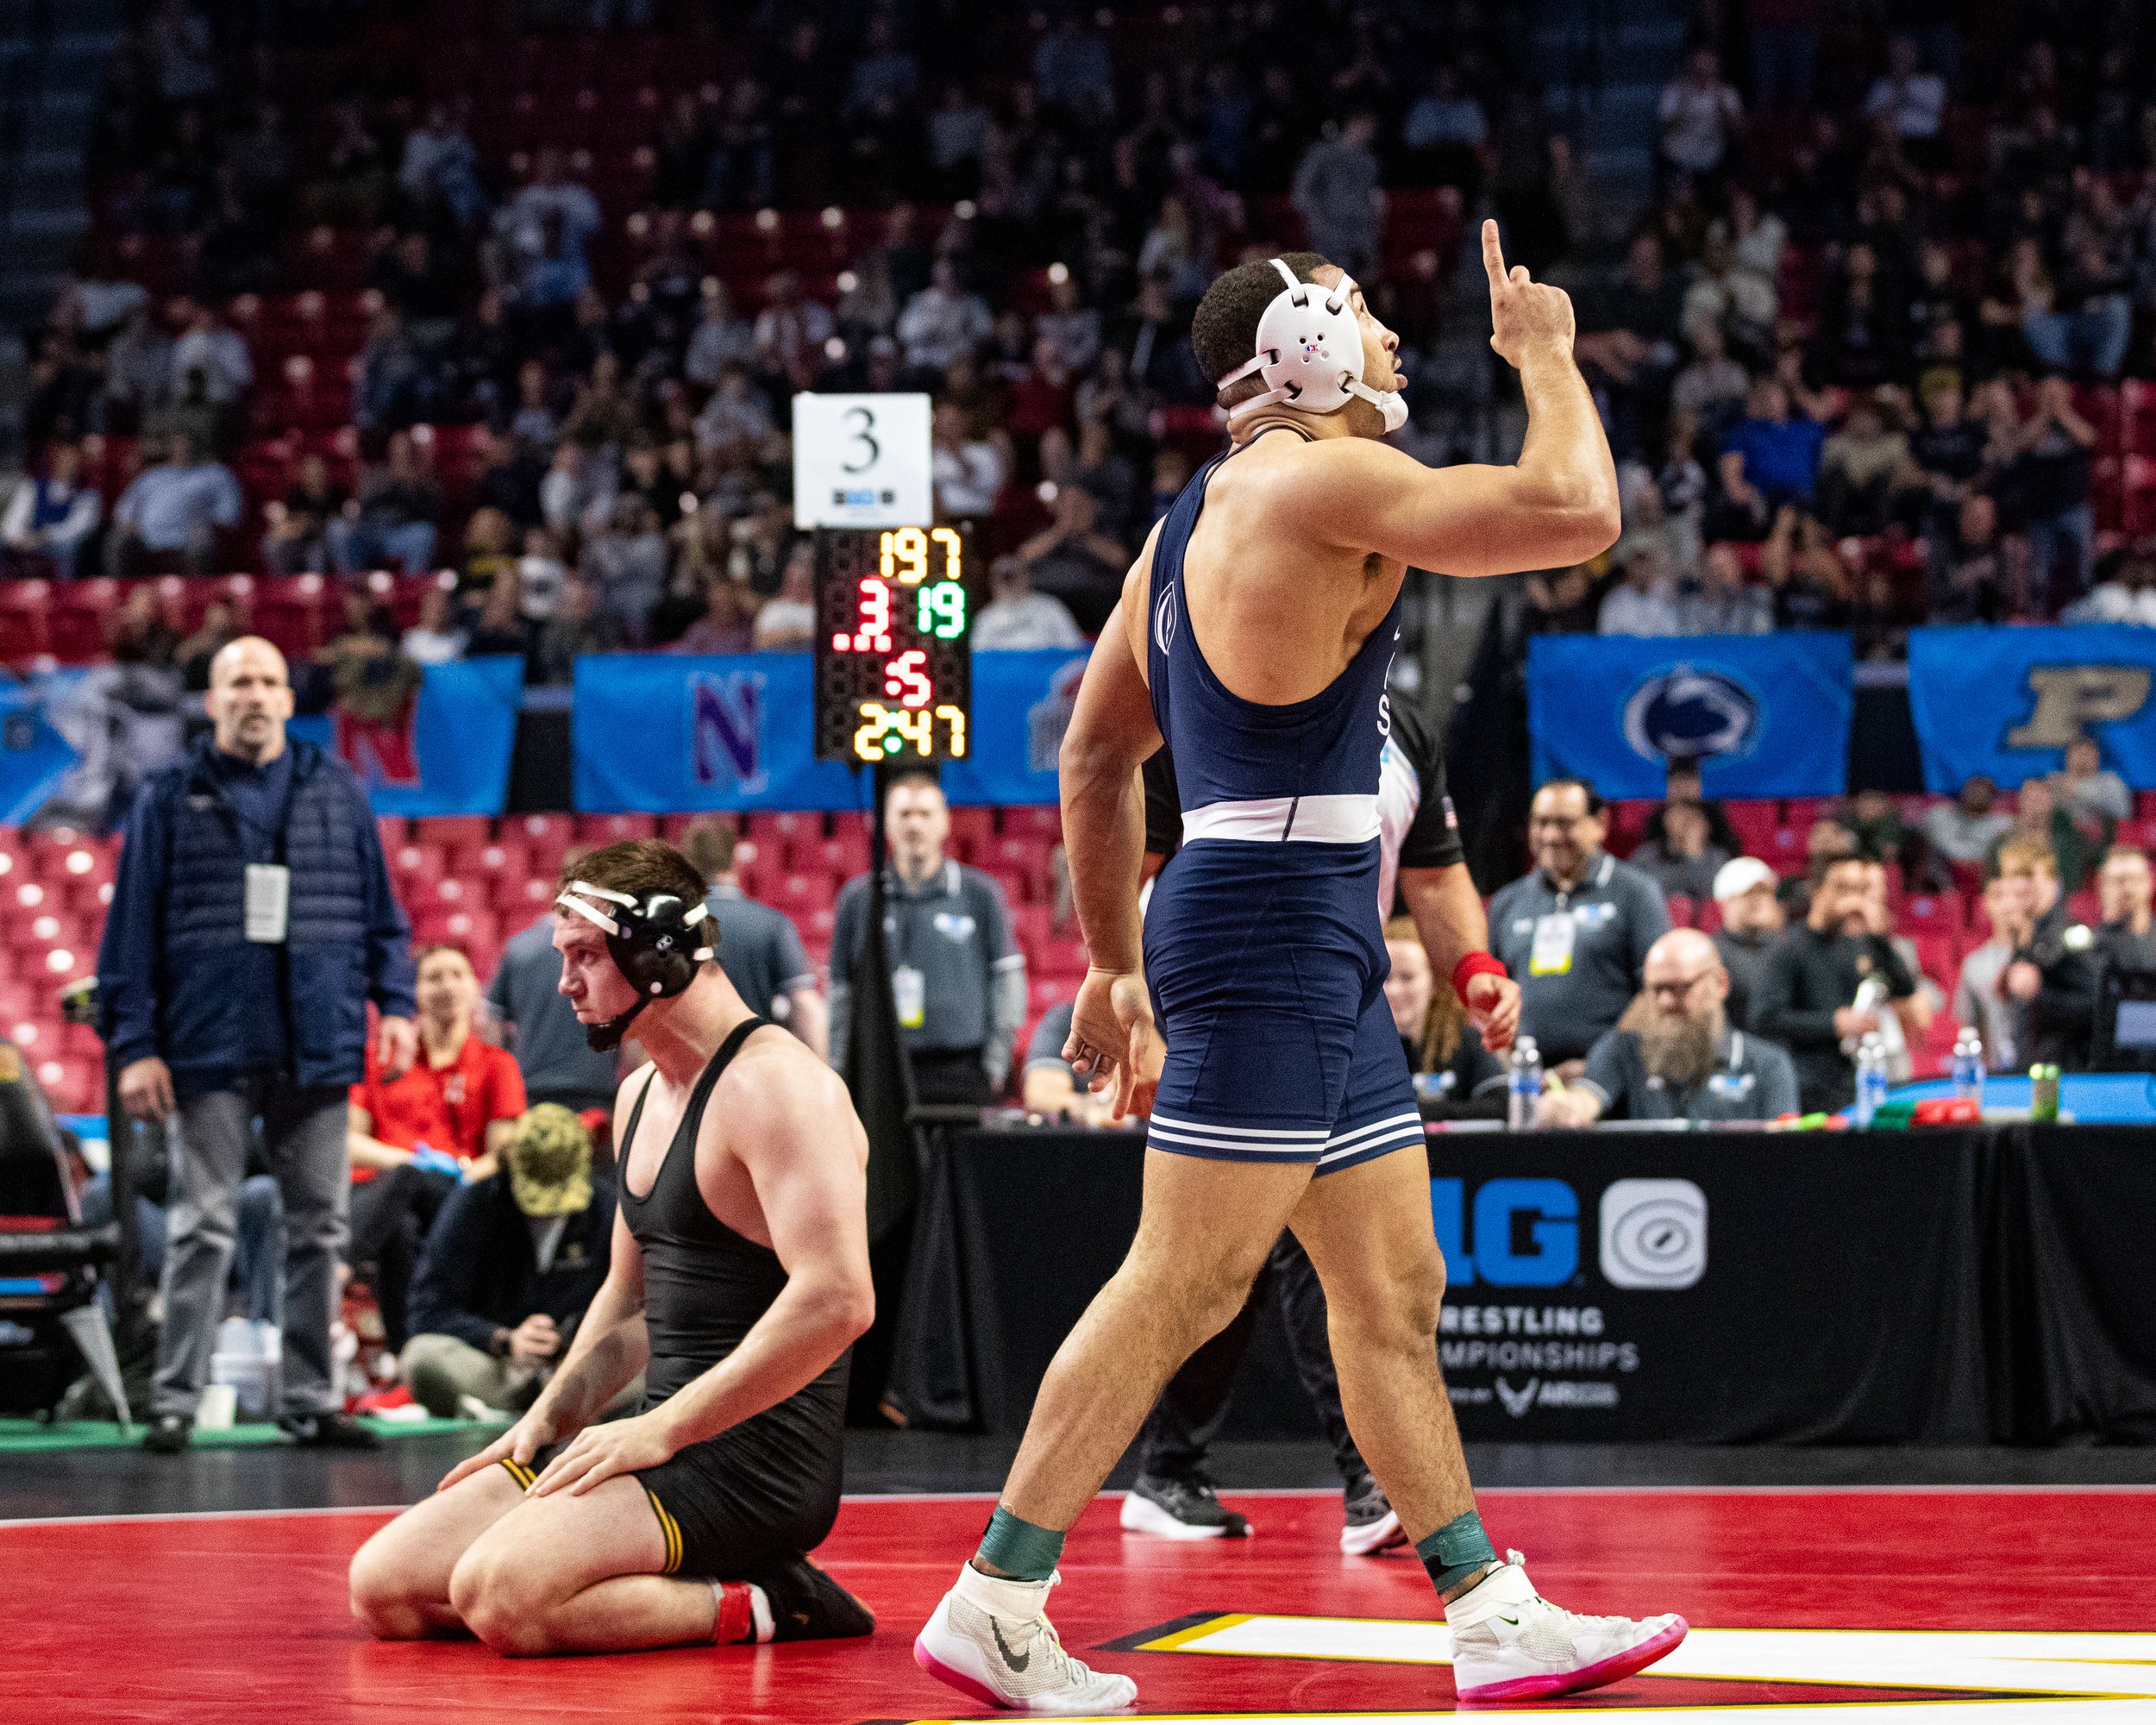  Iowa wrestler Zach Glazier sits on the mat after being defeated by Penn State’s Aaron Brooks in a 197-lb championship match during the Big Ten Wrestling Championships at the Xfinity Center in College Park, Maryland on Sunday, March 10, 2023. Glazier